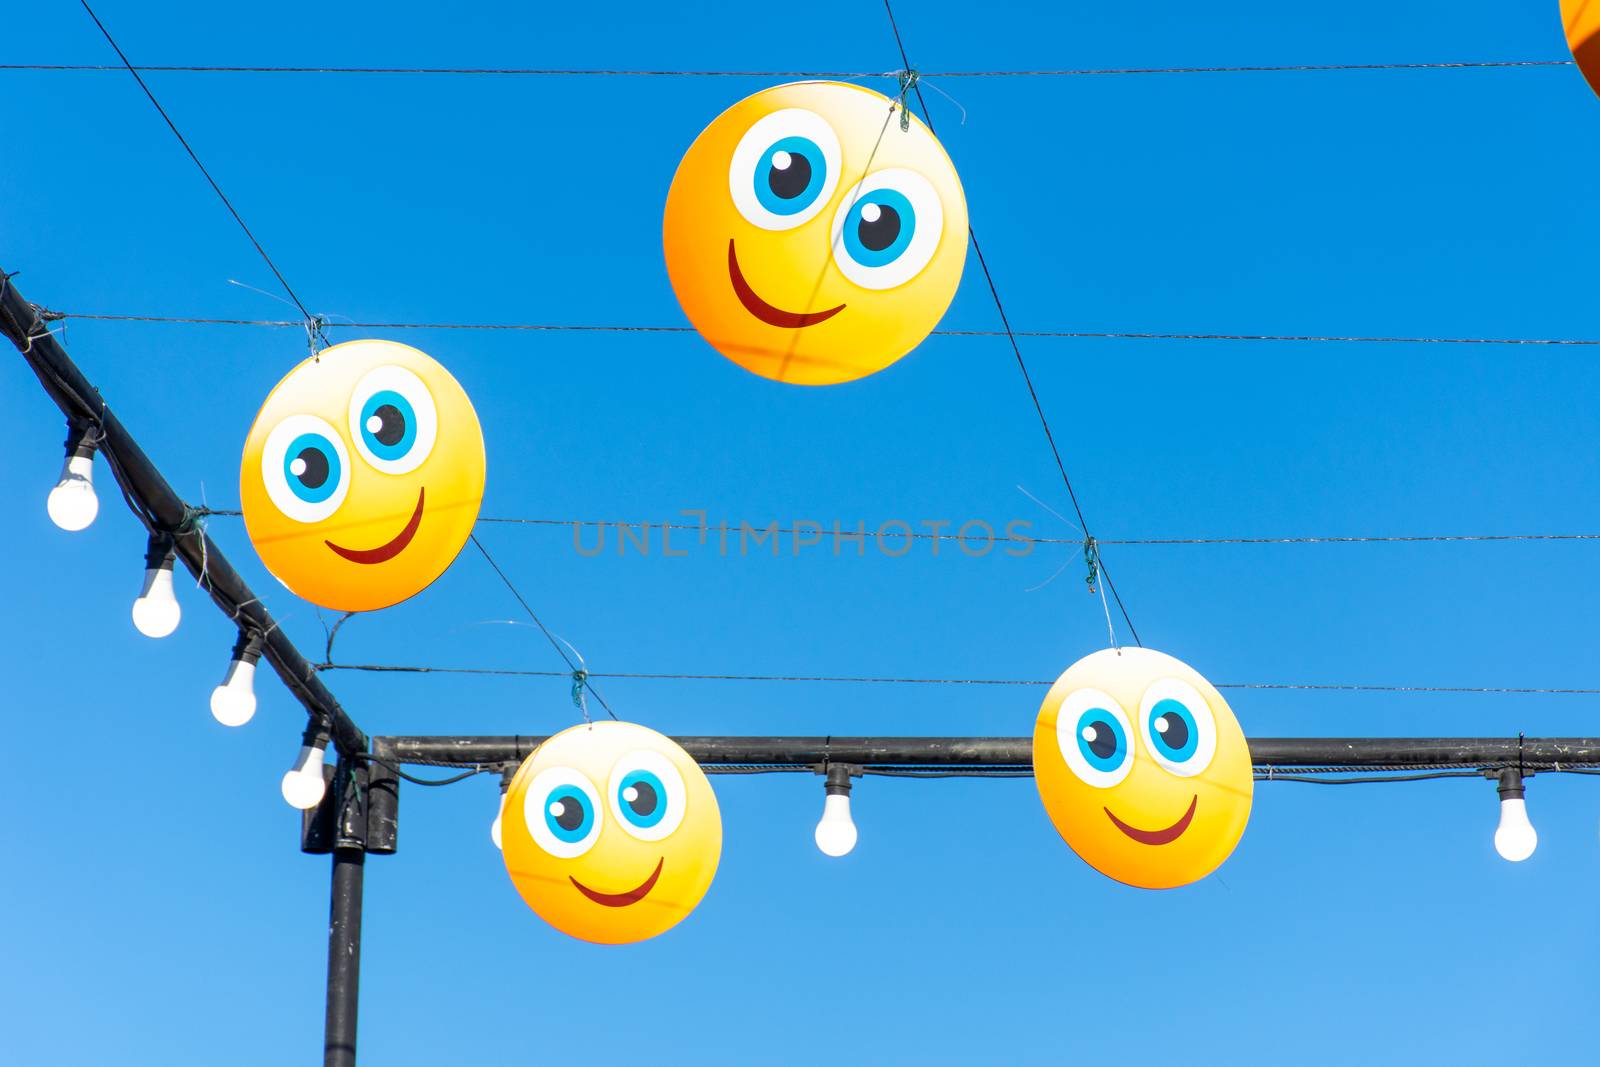 Hanging happy emojis or emoticons on blue sky for a street festival. Happiness, valentine's day, and joy concpets.